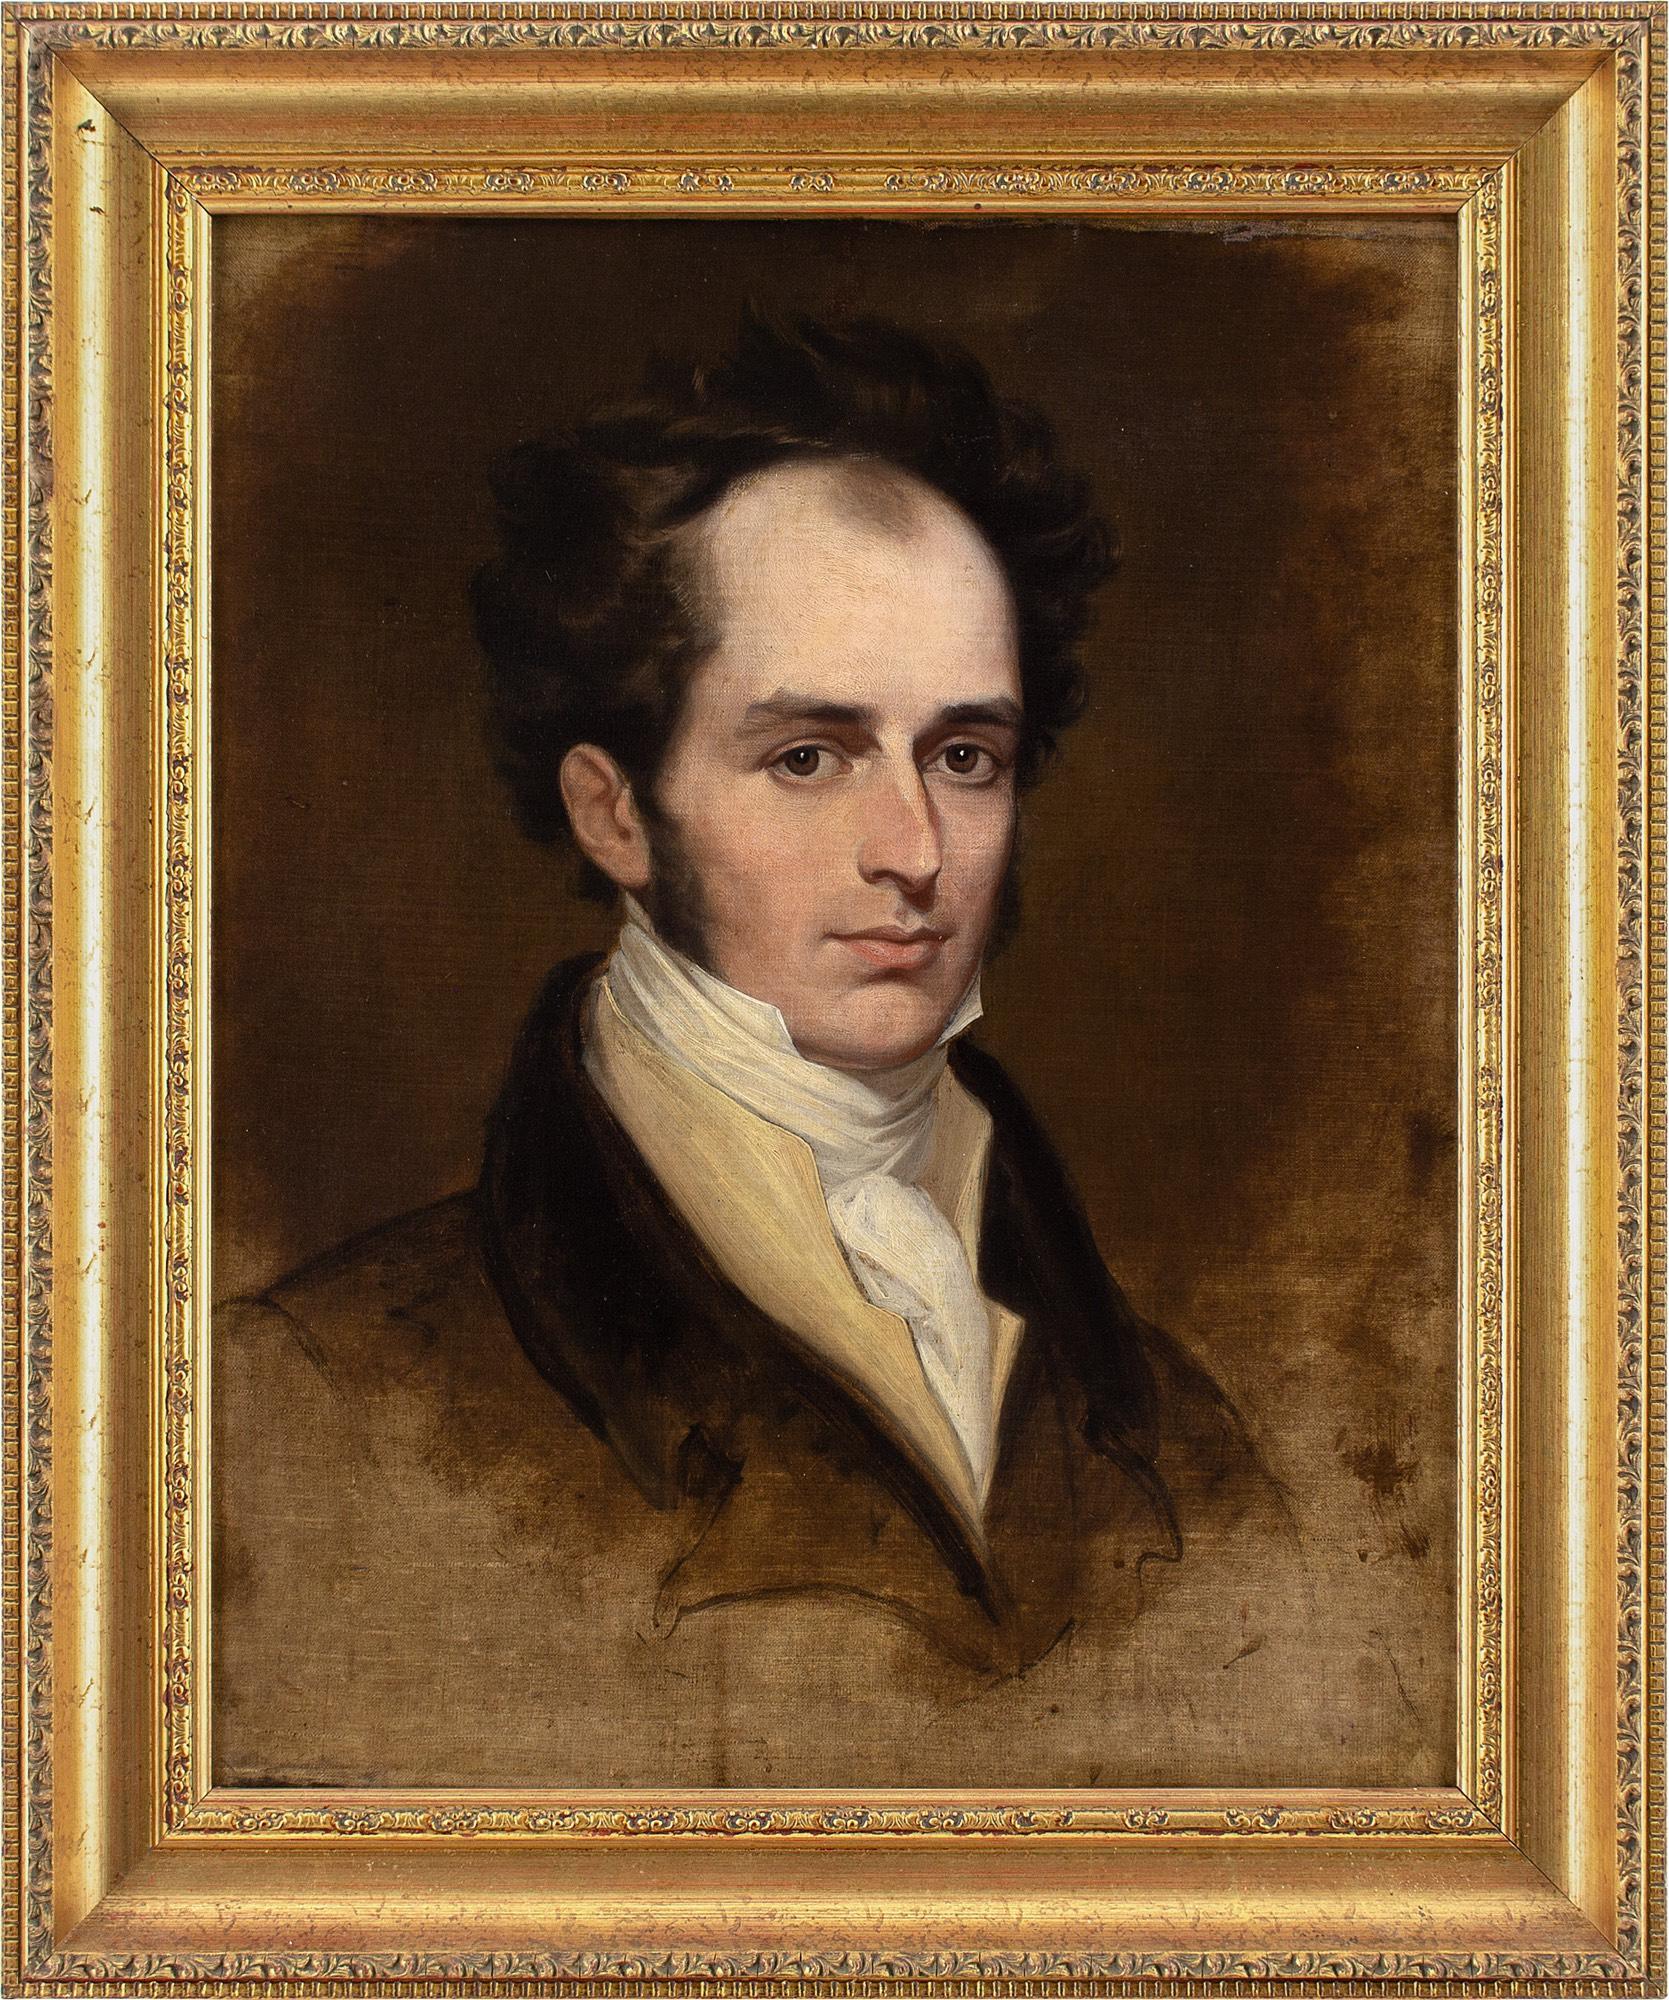 Unknown Portrait Painting - Early 19th-Century English School, Portrait Study Of A Gentleman